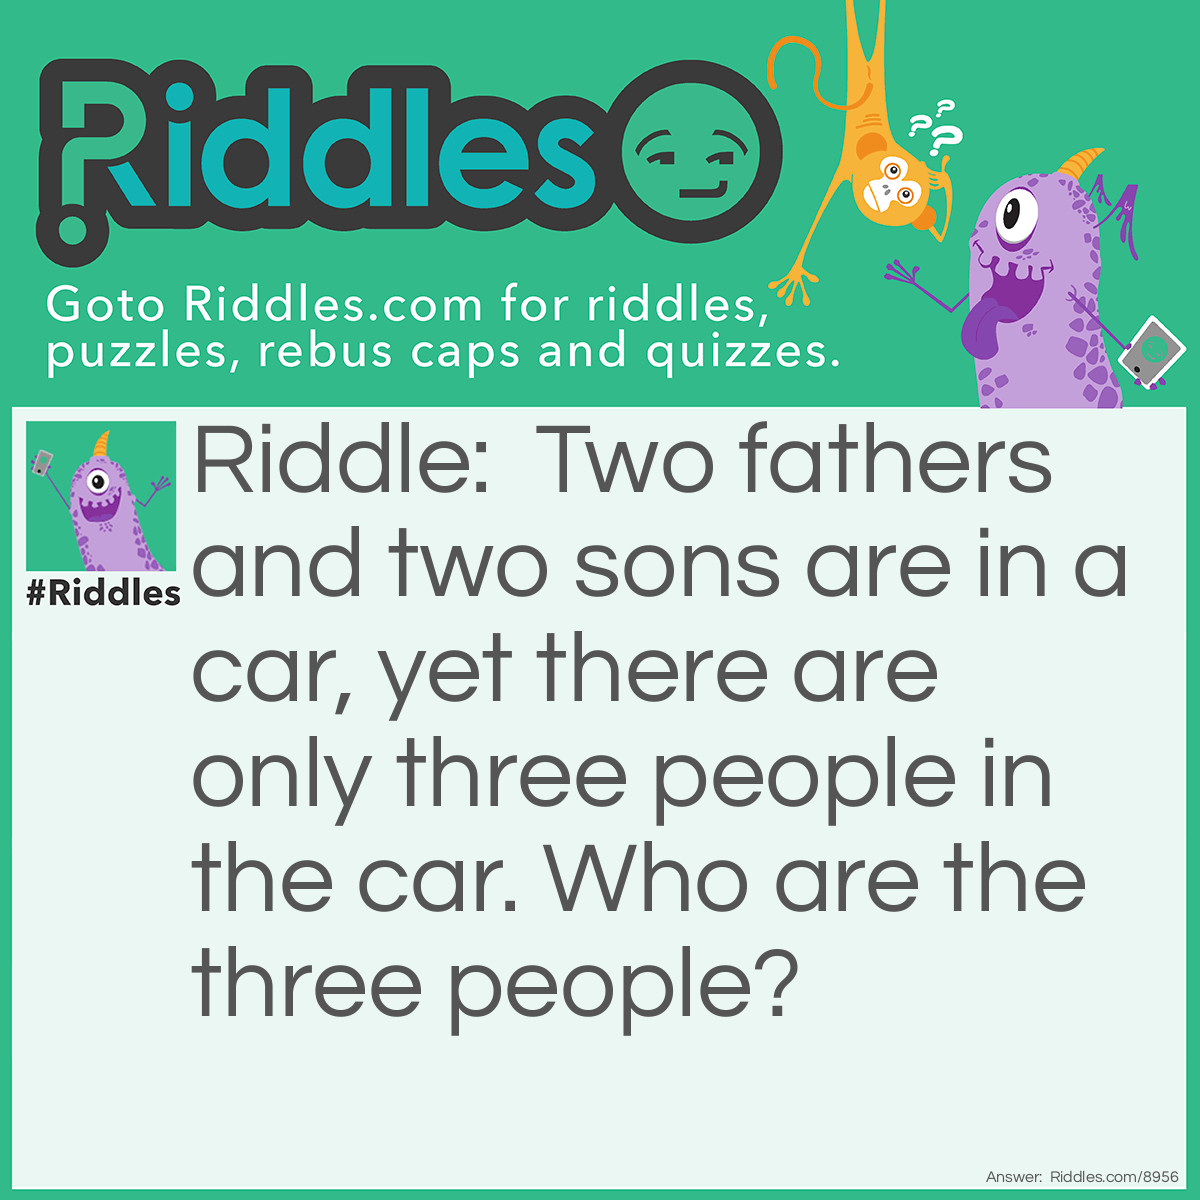 Riddle: Two fathers and two sons are in a car, yet there are only three people in the car. Who are the three people? Answer: Grandfather, father, and son.